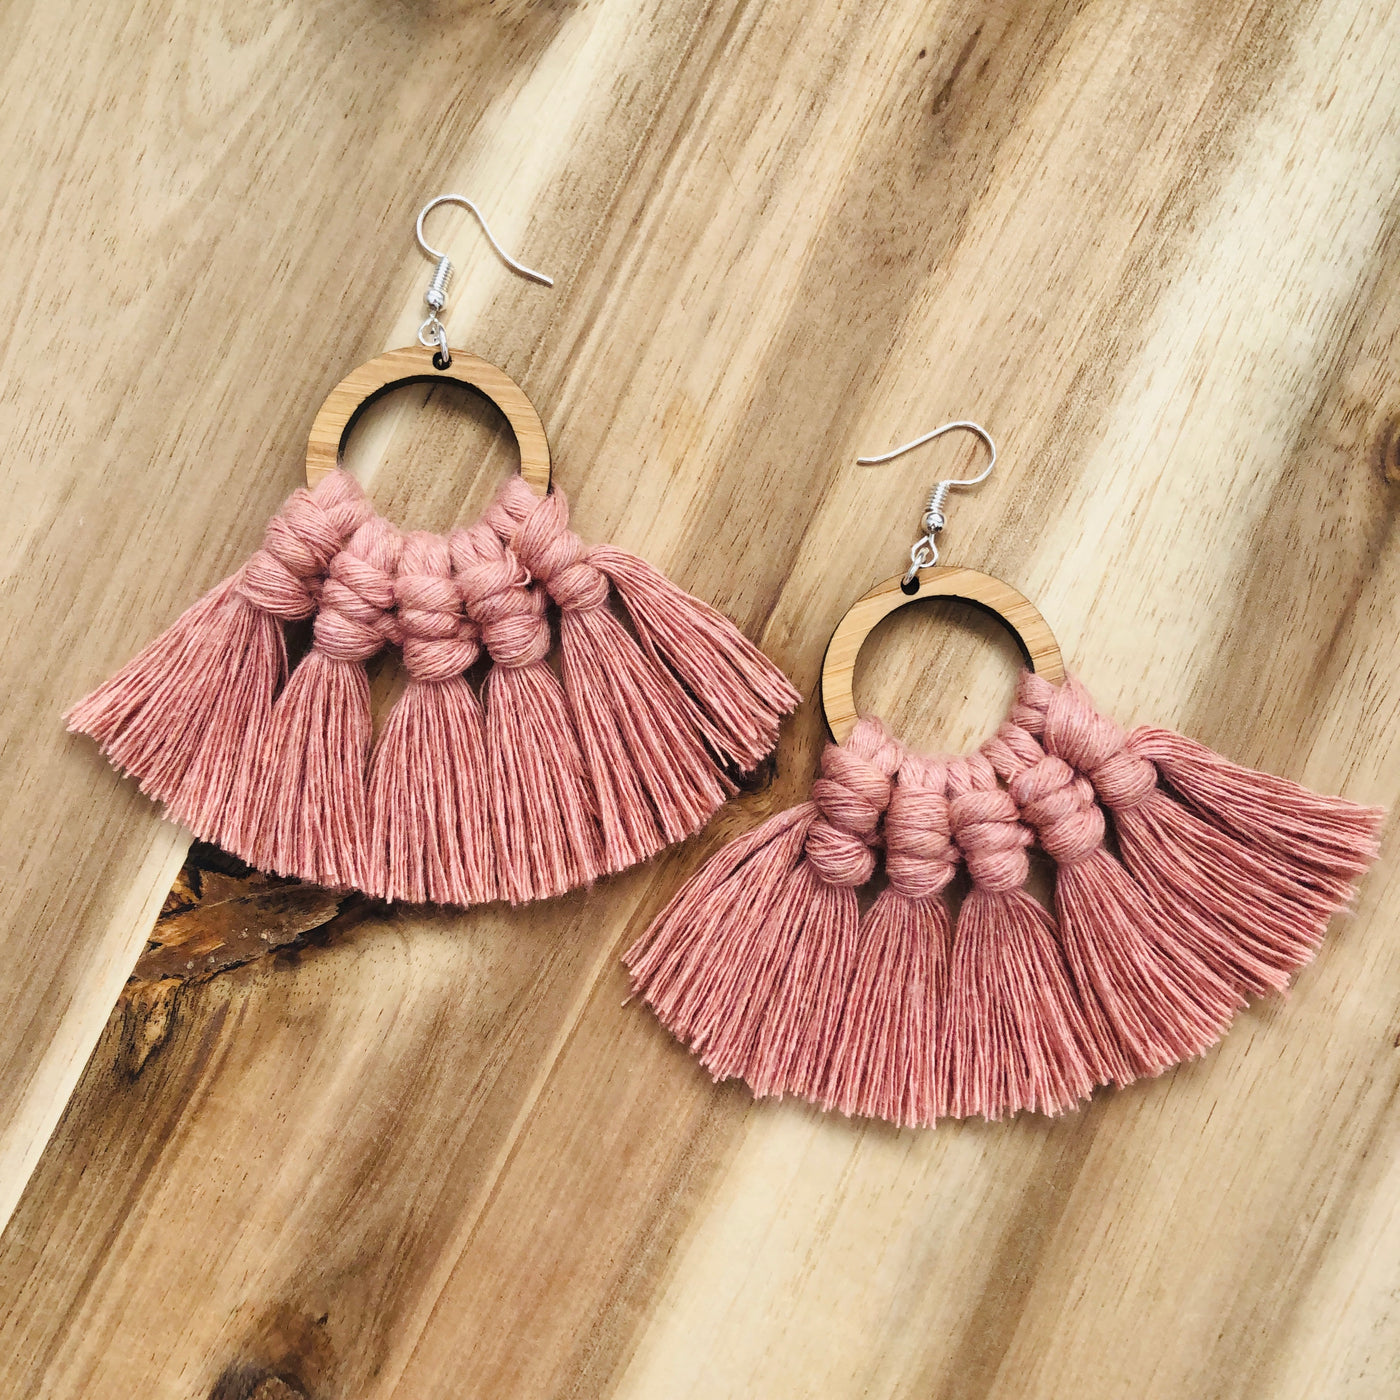 Accessories - Bamboo Earrings Small Circles